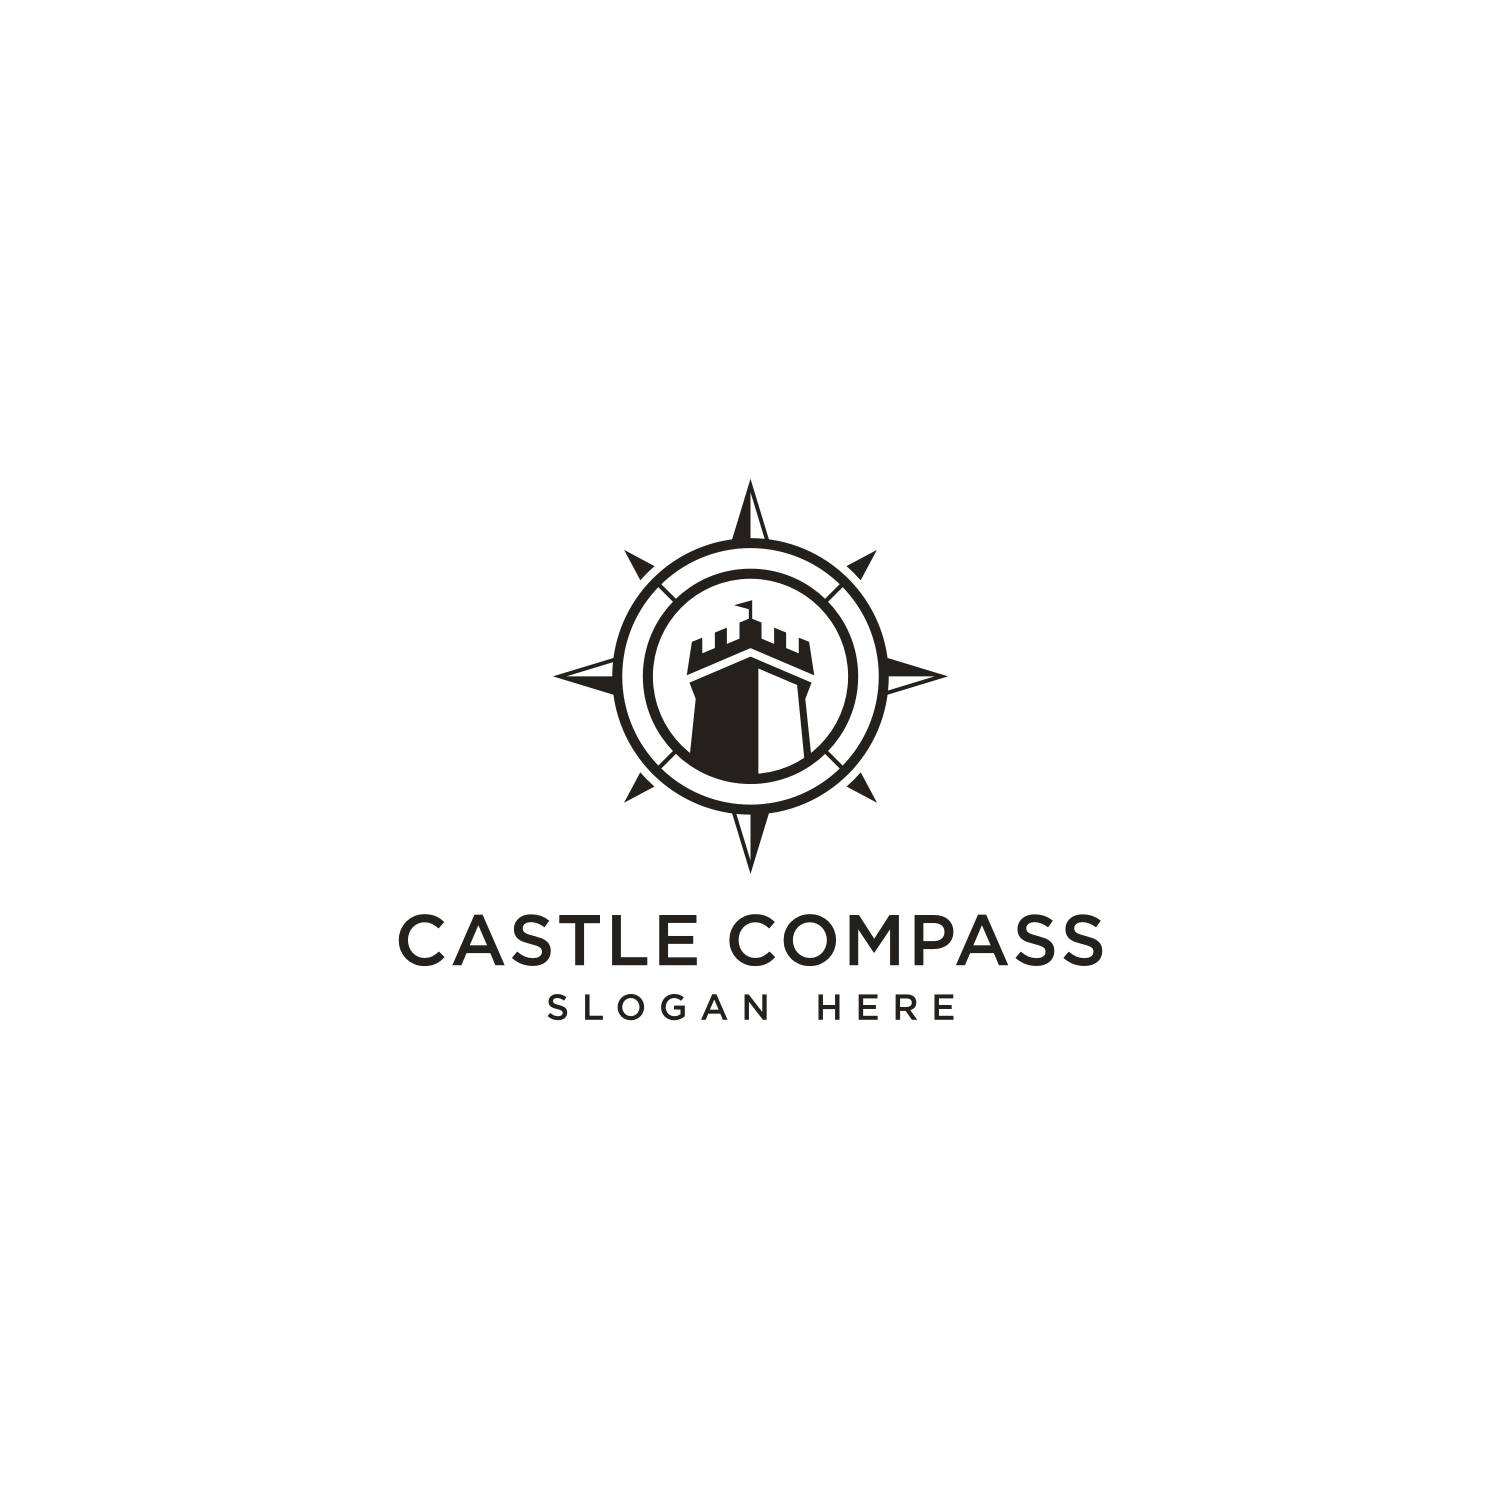 Castle And Compass Concept Adventure Or Journey Logo Design Inspiration Cover Image.